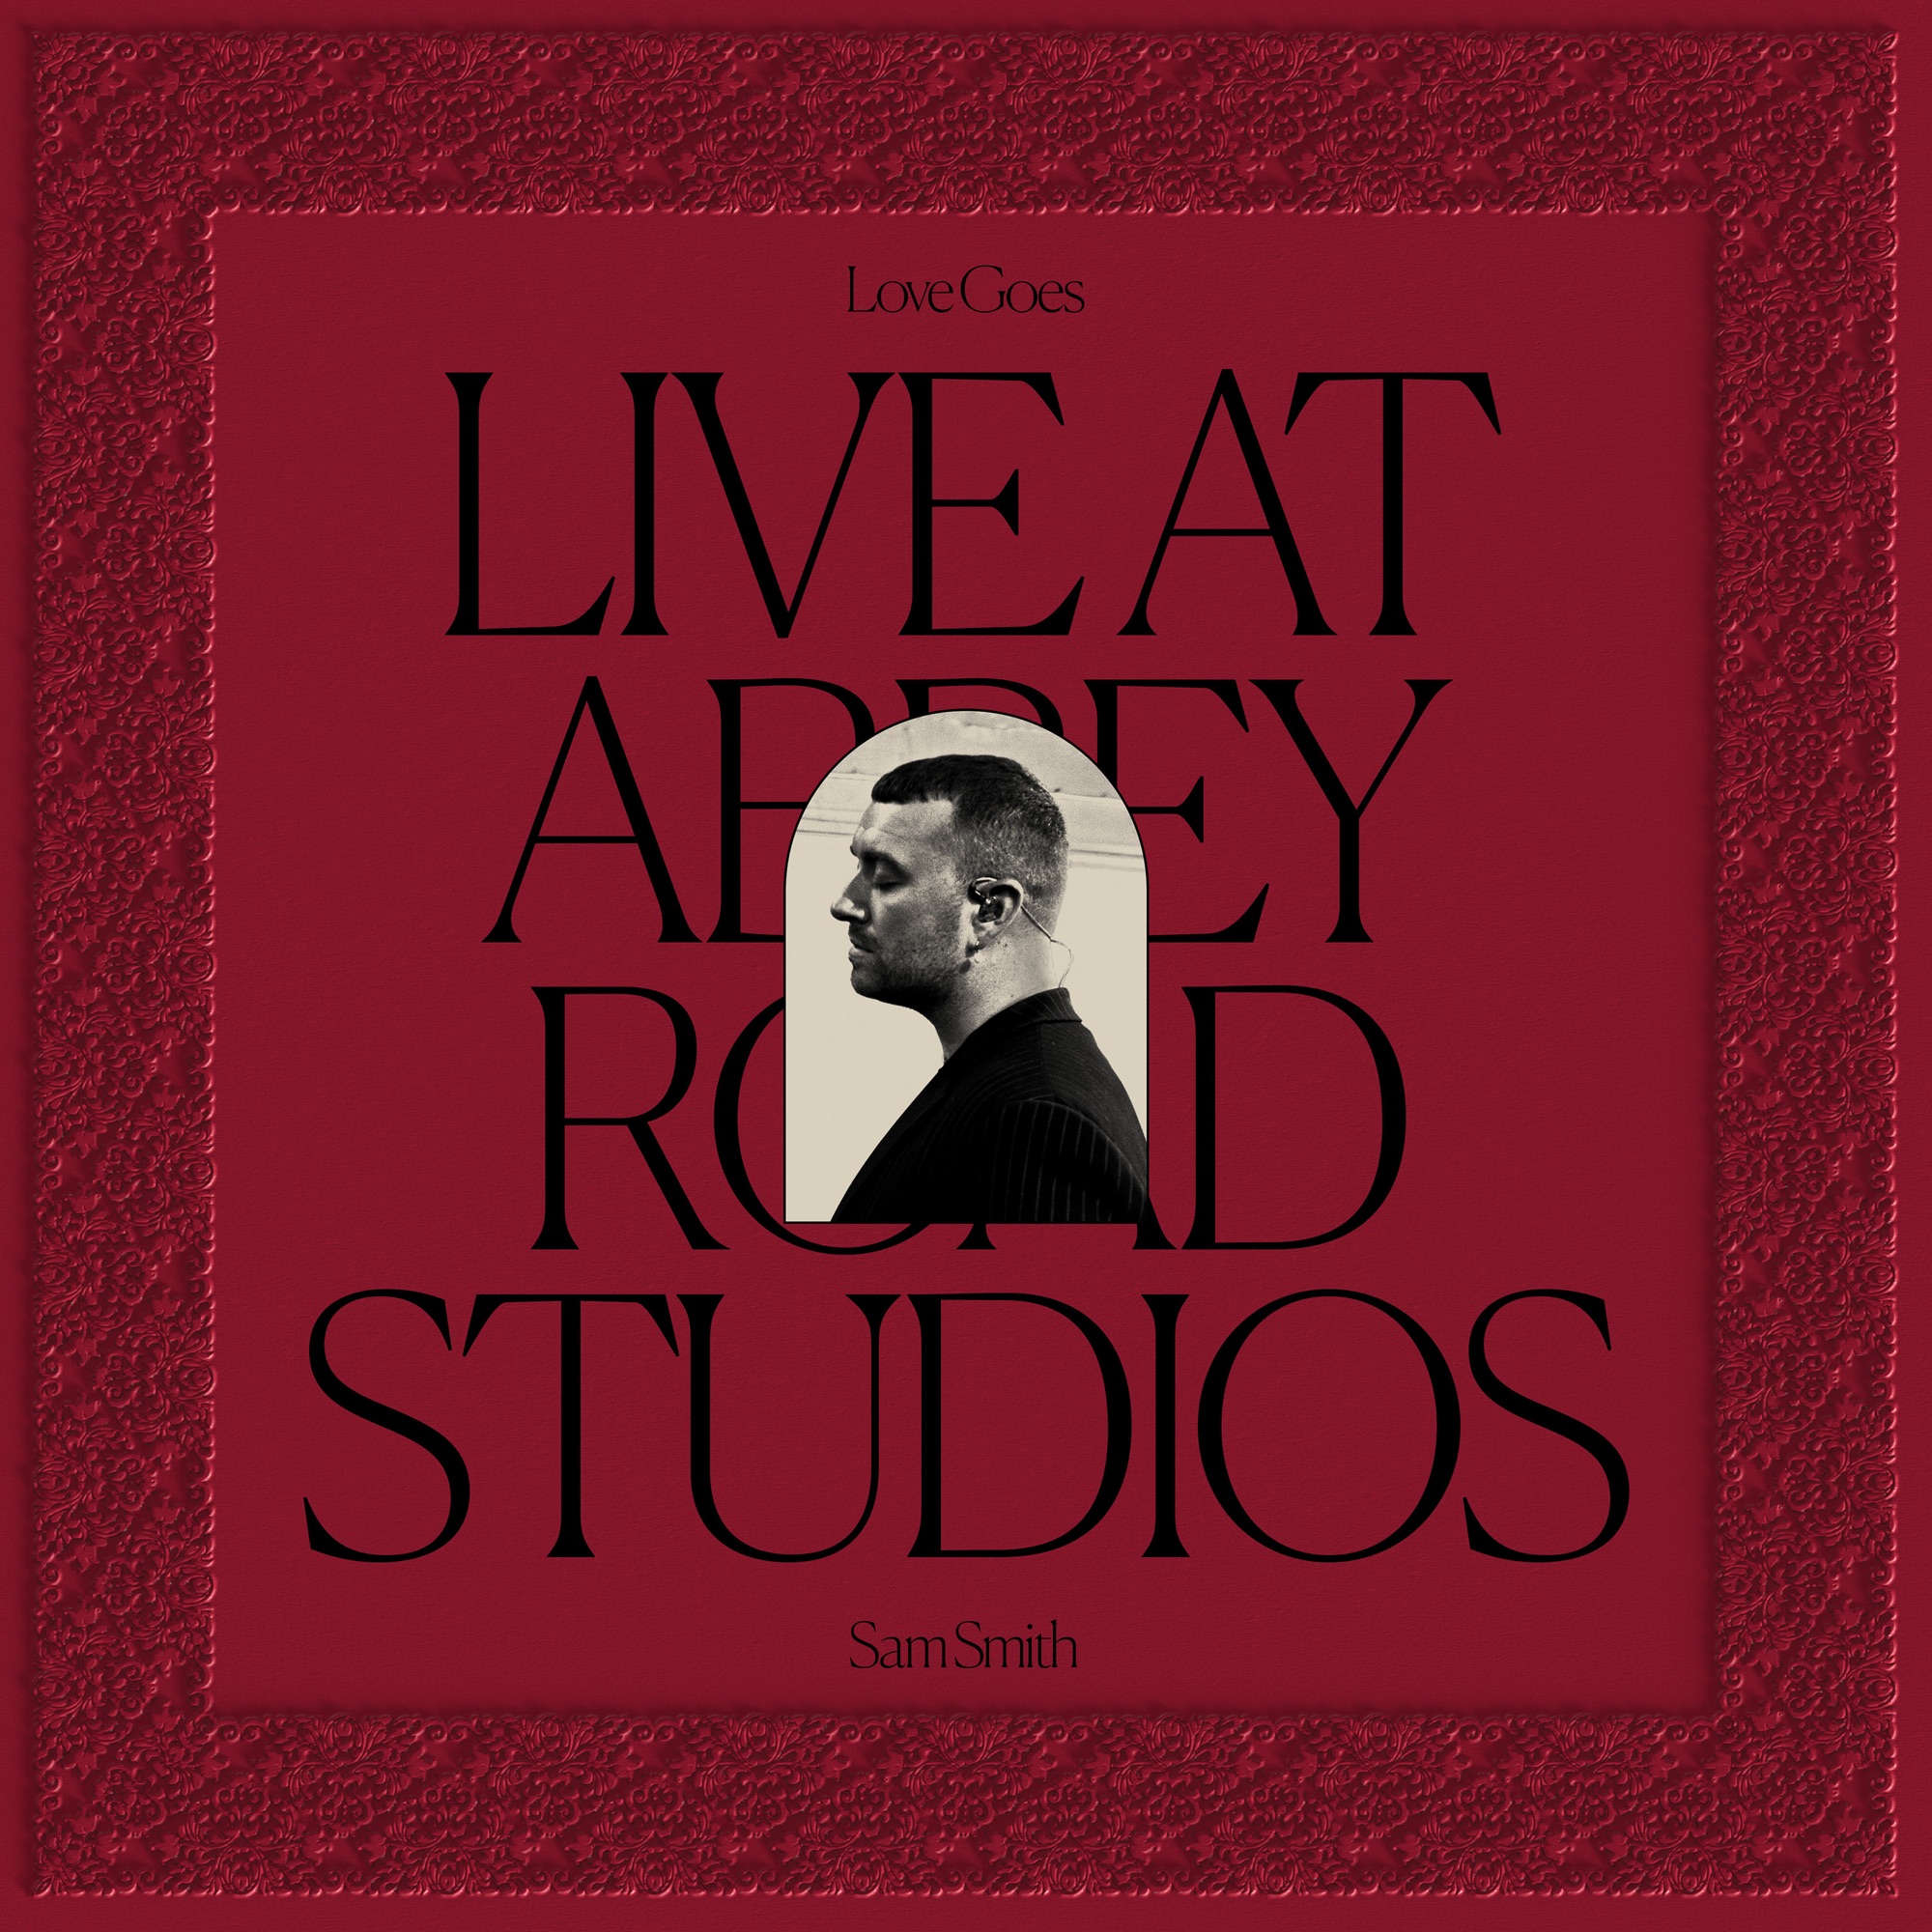 Sam Smith - Time After Time (Live at Abbey Road Studios) - Single